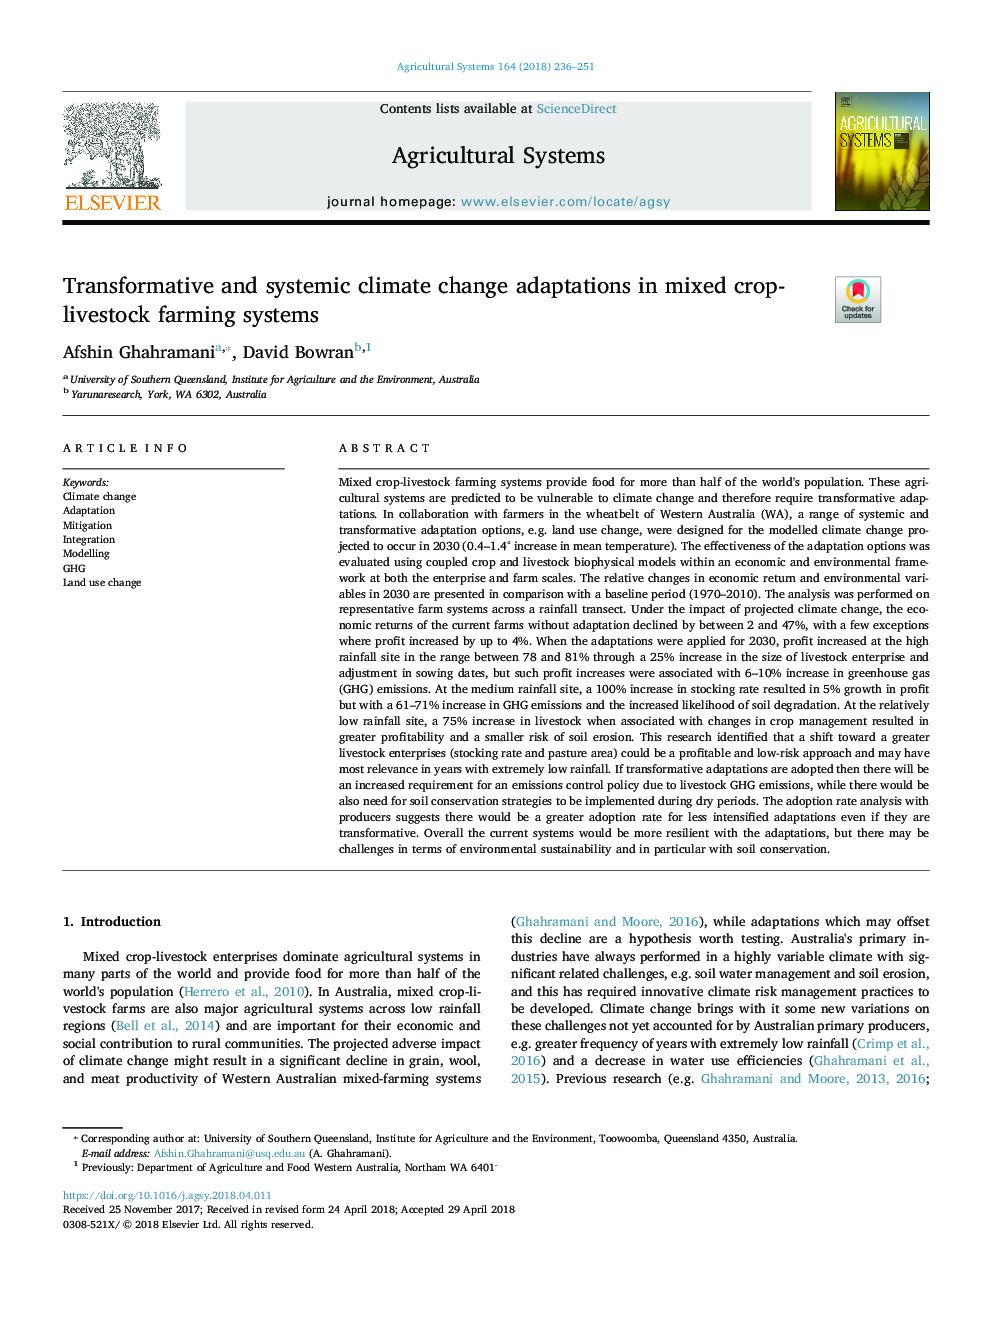 Transformative and systemic climate change adaptations in mixed crop-livestock farming systems